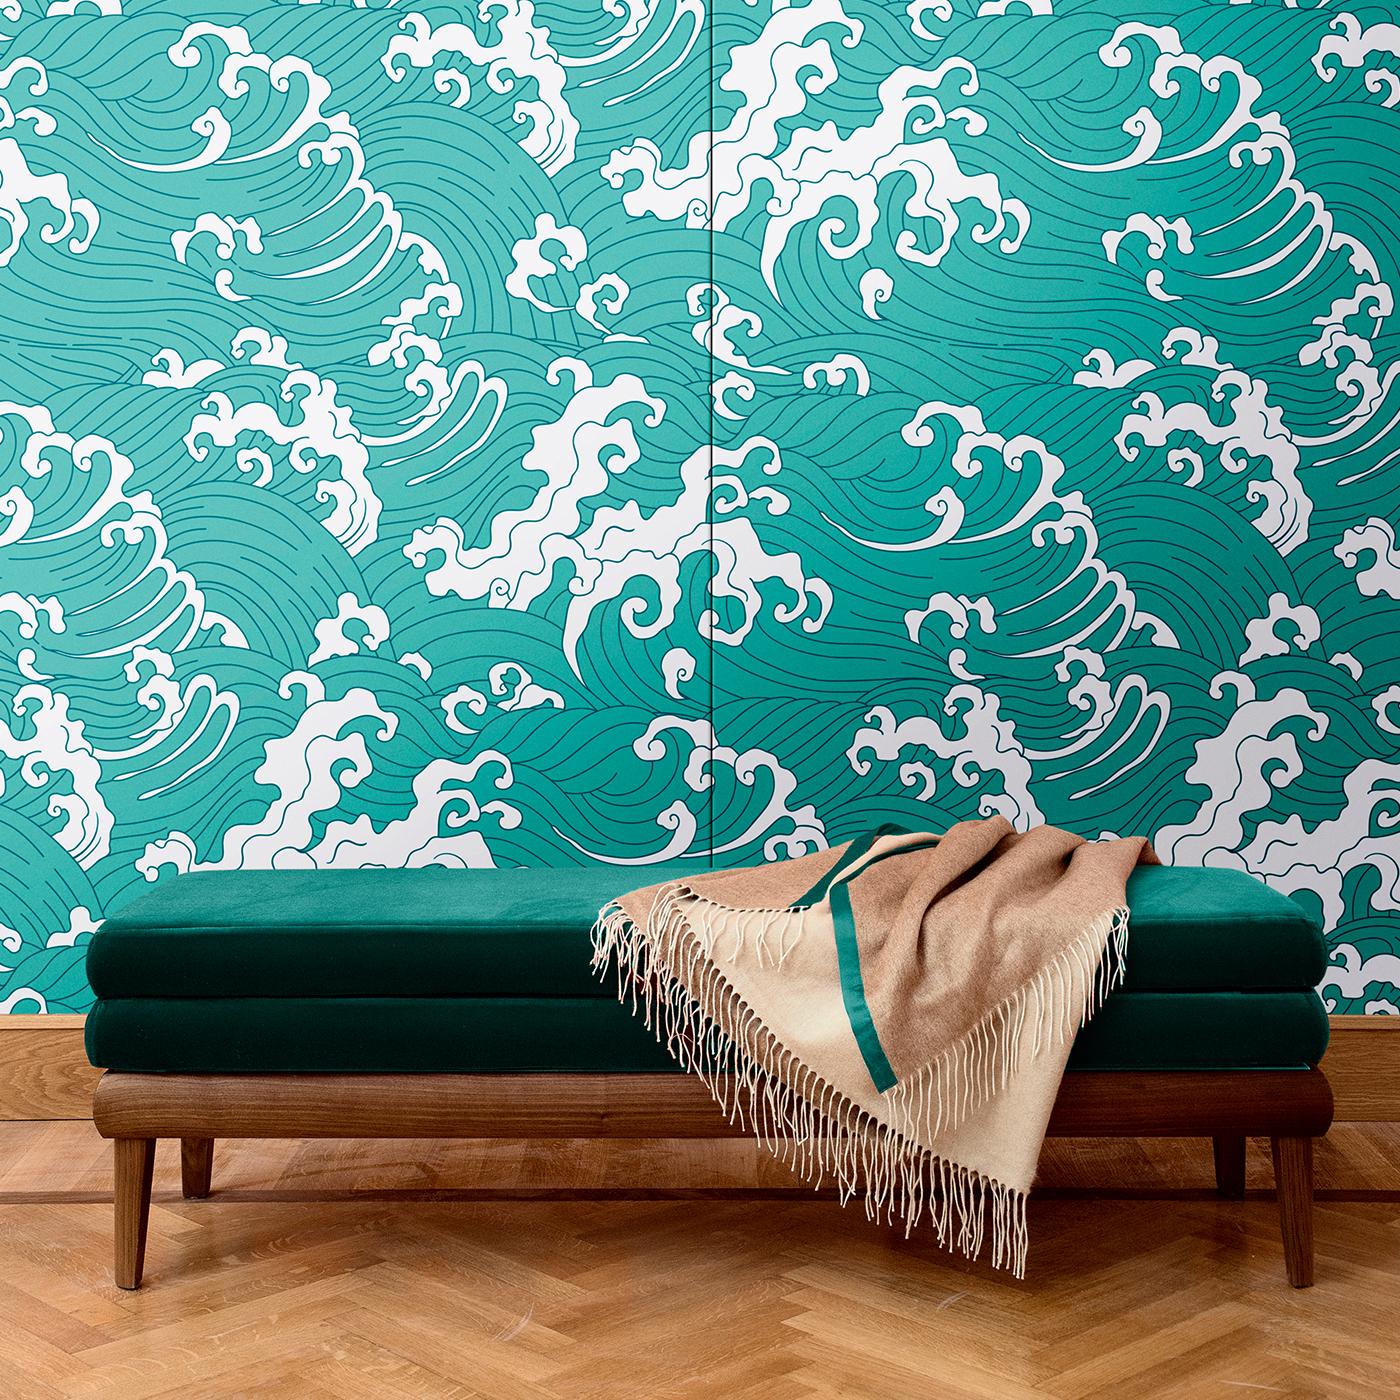 Inspired by the sophisticated elegance of traditional Japanese art, the design of this decoration will add a timeless accent to a whole room or a single wall. Part of the Waves collection, this wall covering is available in light blue, yellow, red,